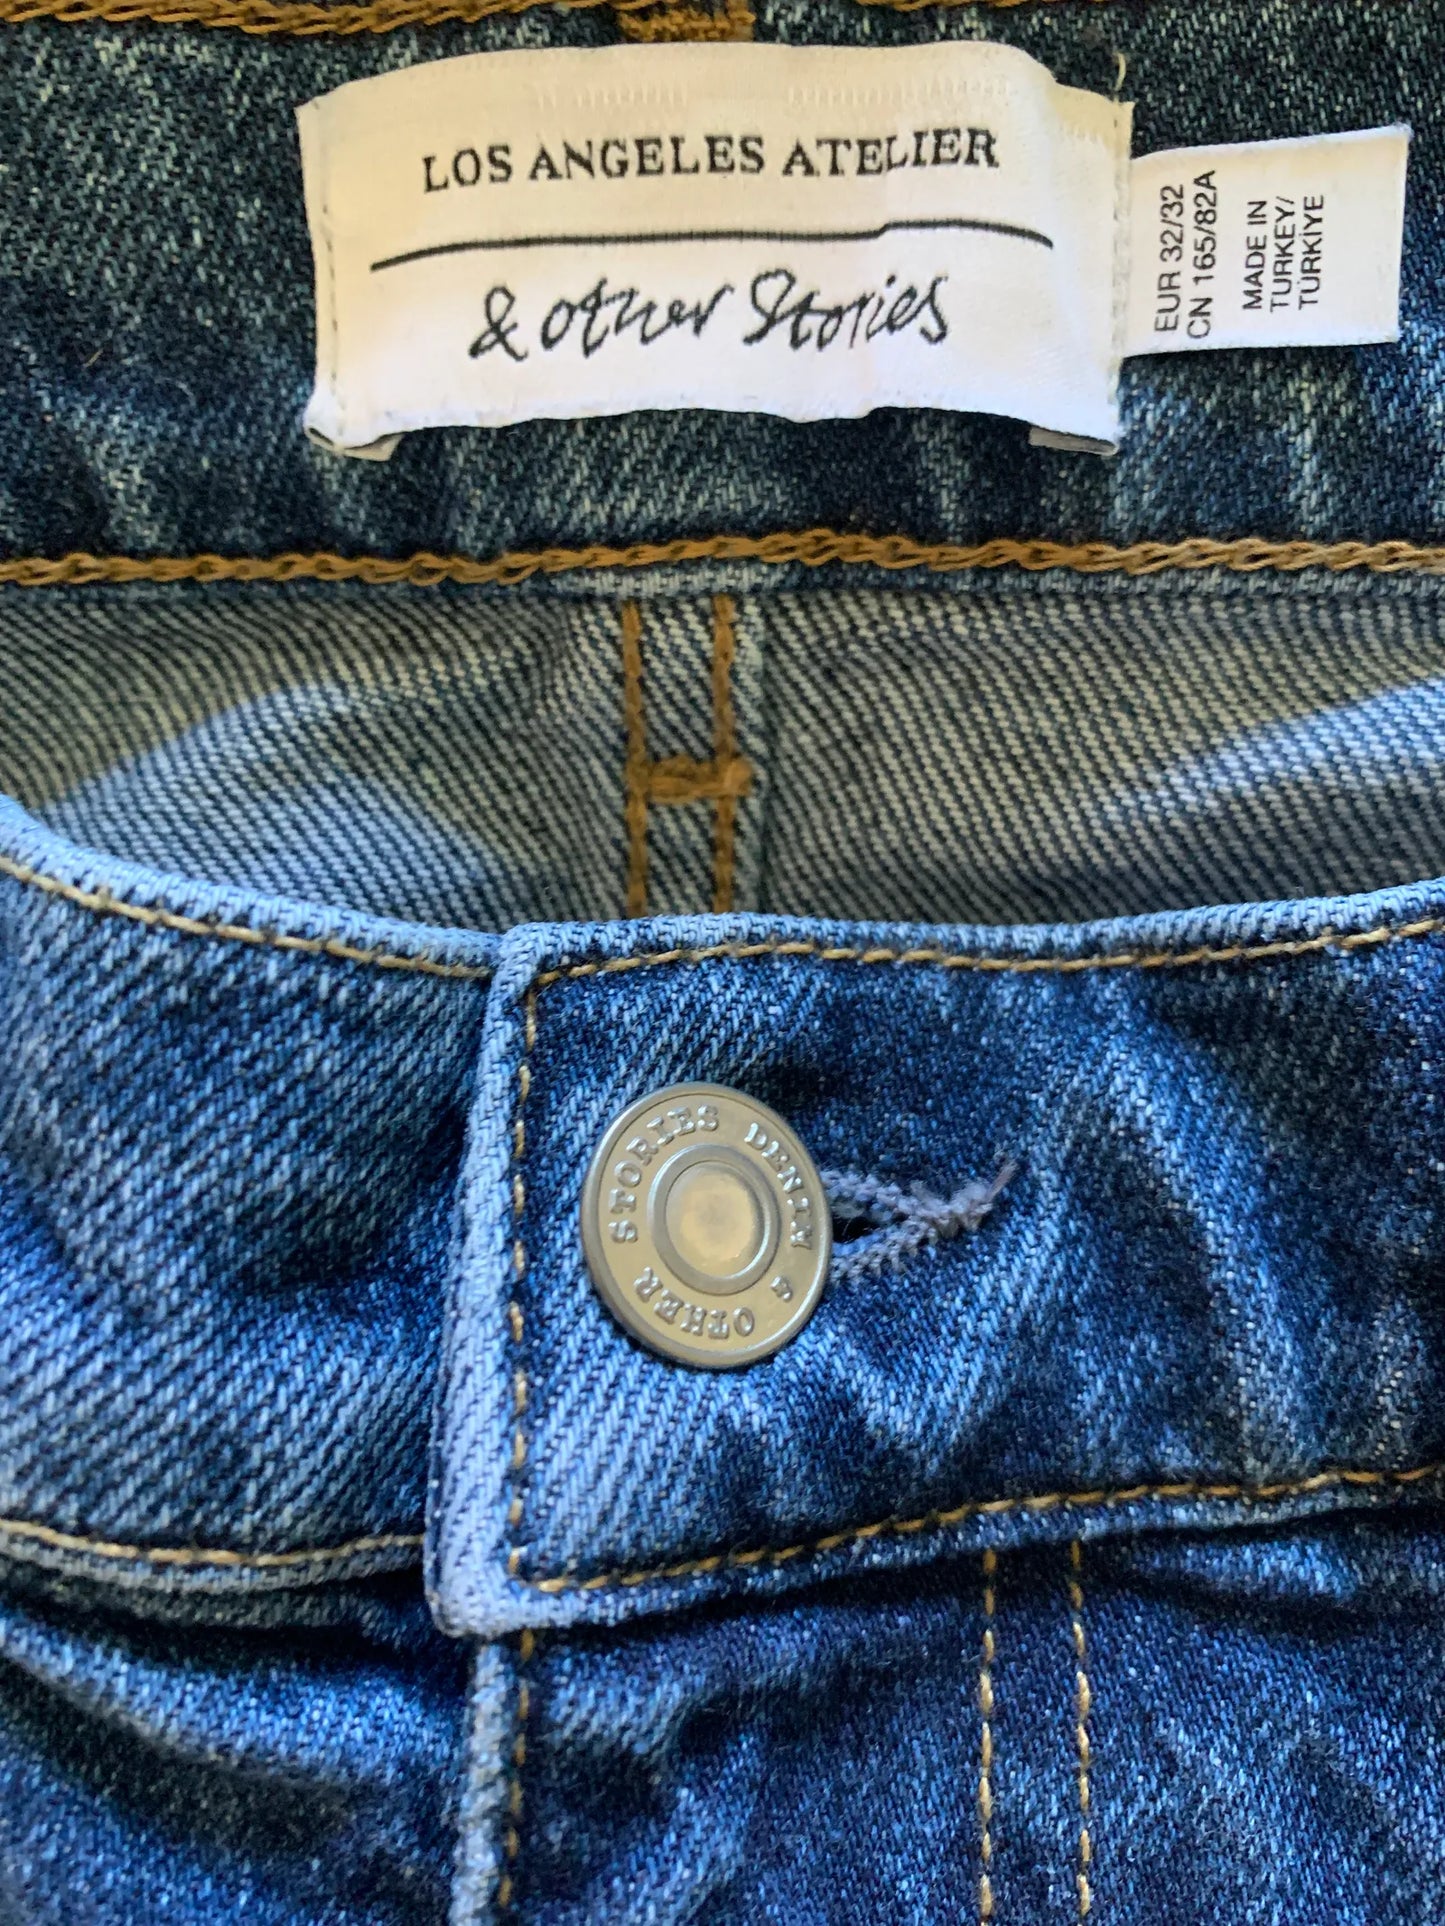 & Other Stories-jeans